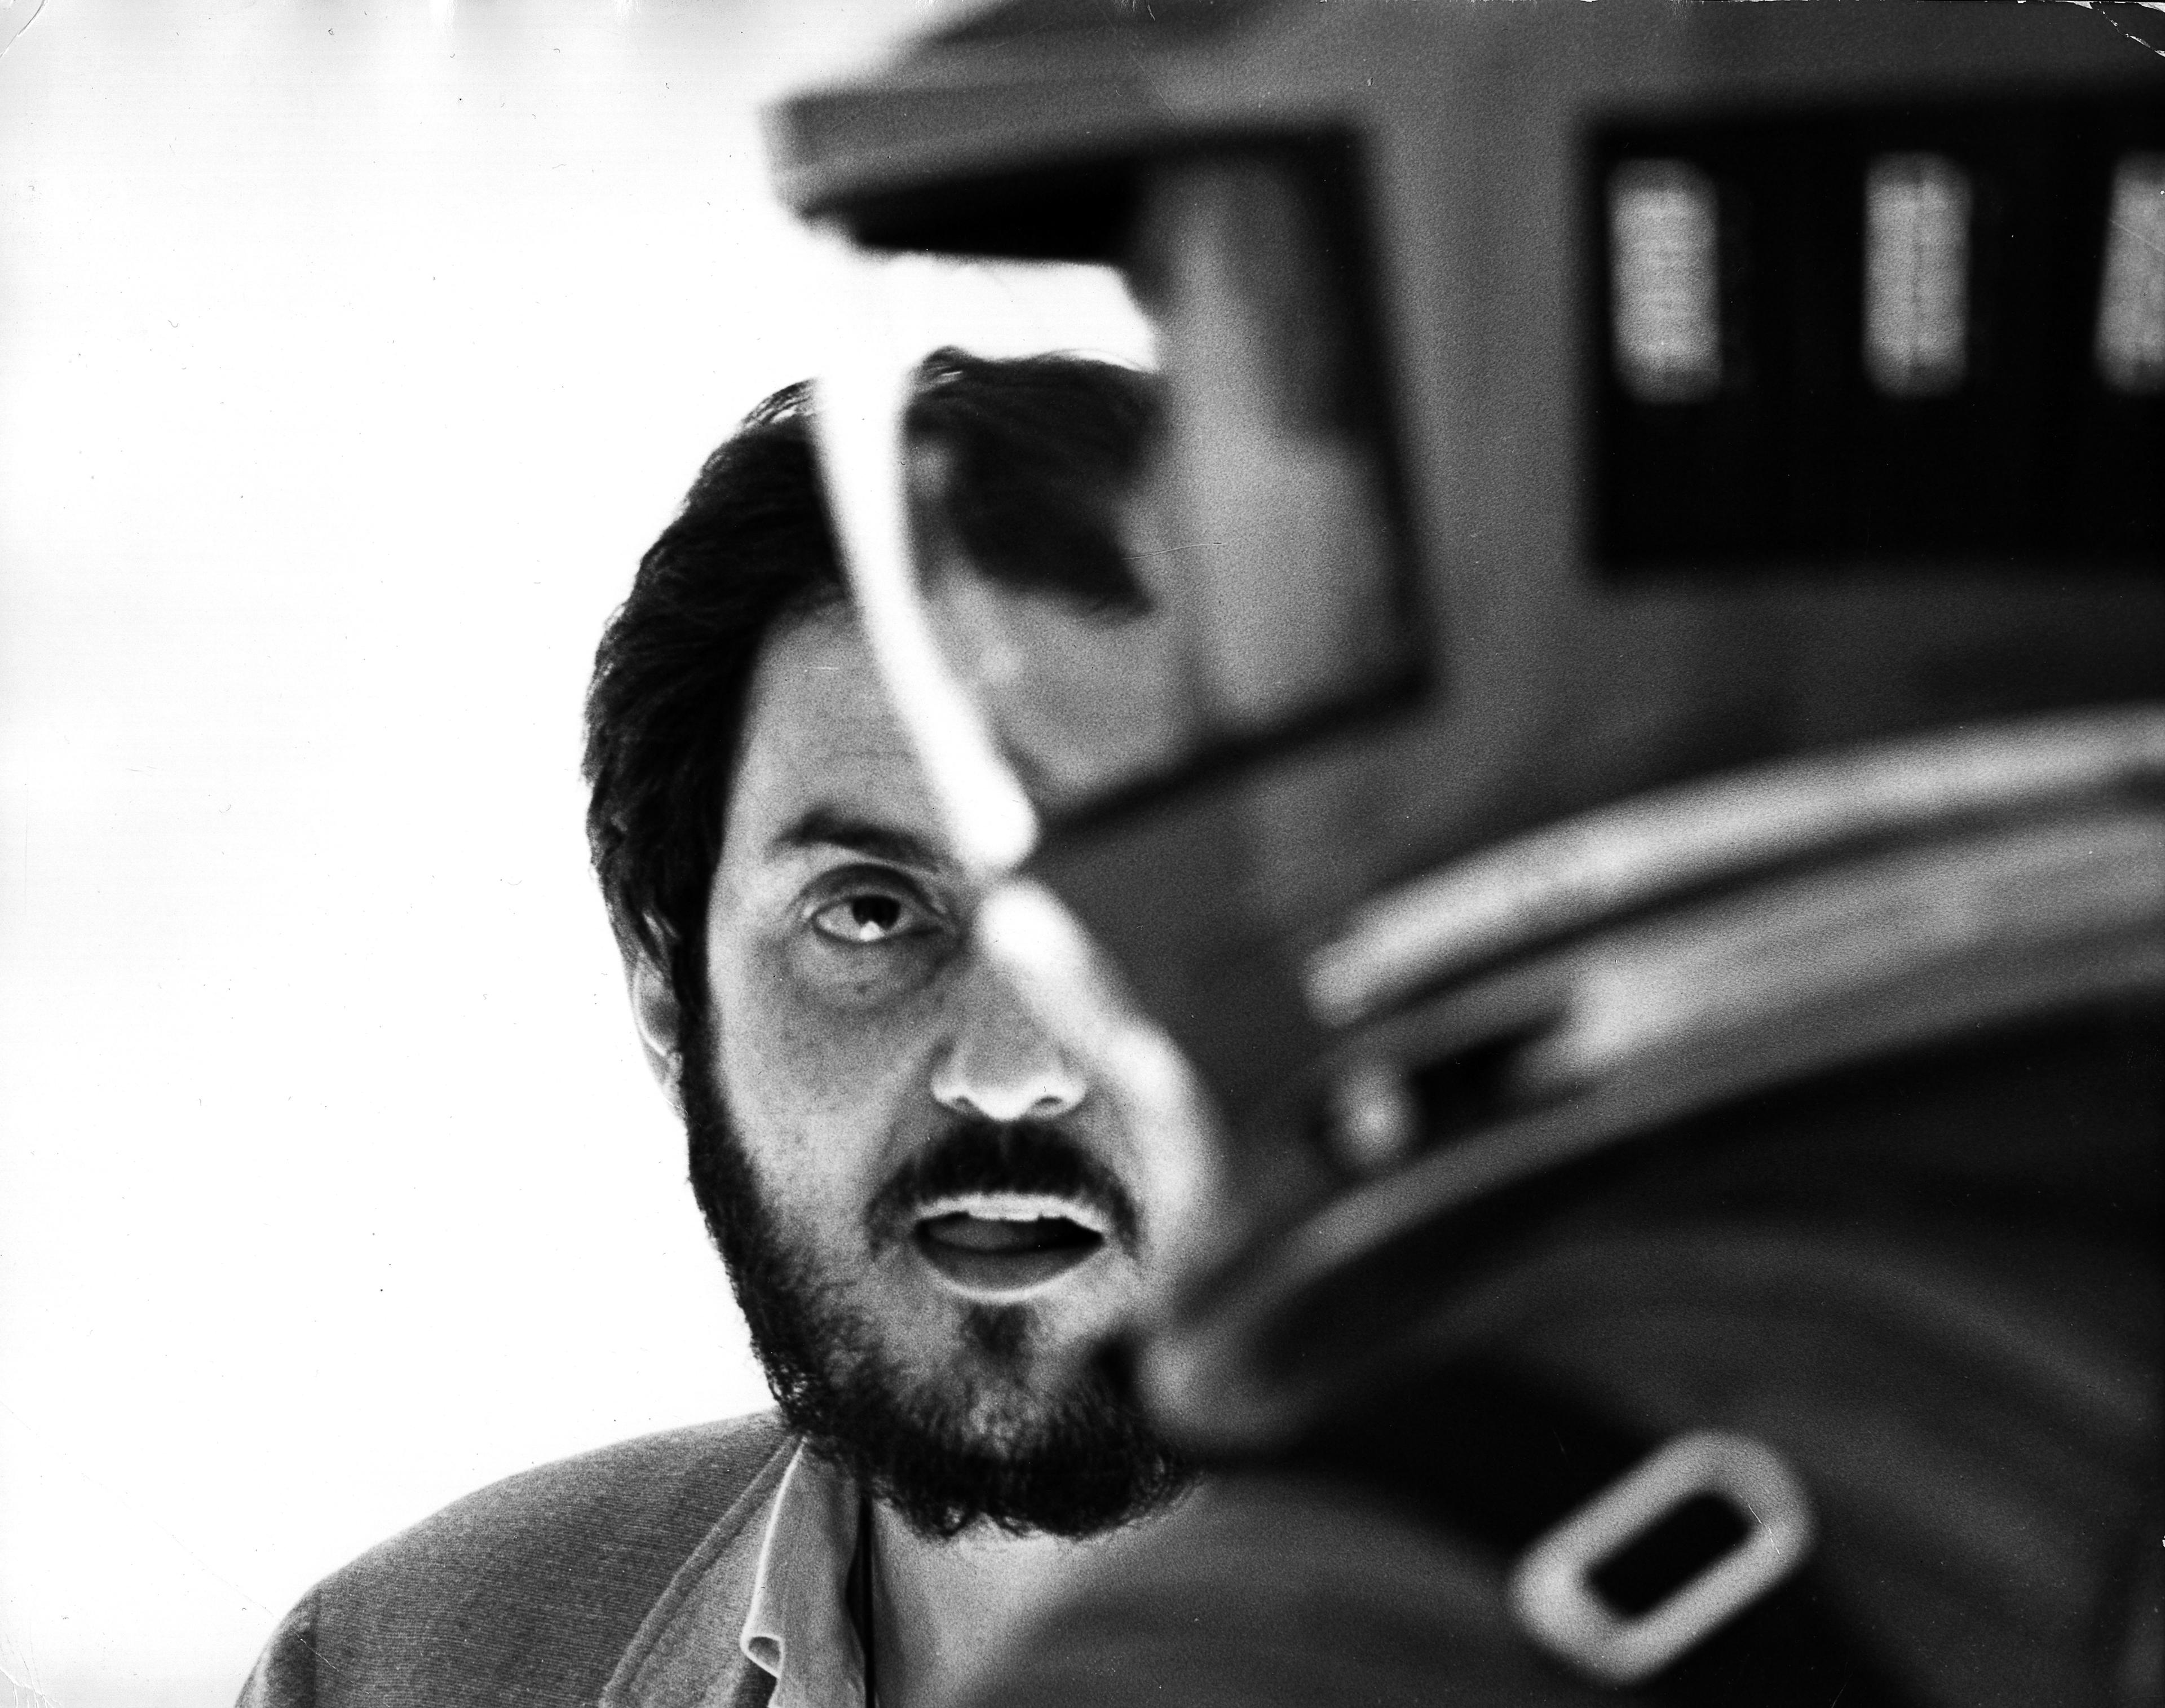 The Los Angeles County Museum of Art (LACMA) and the Academy of Motion Picture Arts and Sciences (The Academy) are pleased to co-present the first U.S. retrospective of filmmaker Stanley Kubrick, developed in collaboration with the Kubrick Estate and the Deutsches Filmmuseum, Frankfurt. Pictured: Stanley Kubrick during the filming of 2001: A SPACE OYSSEY.